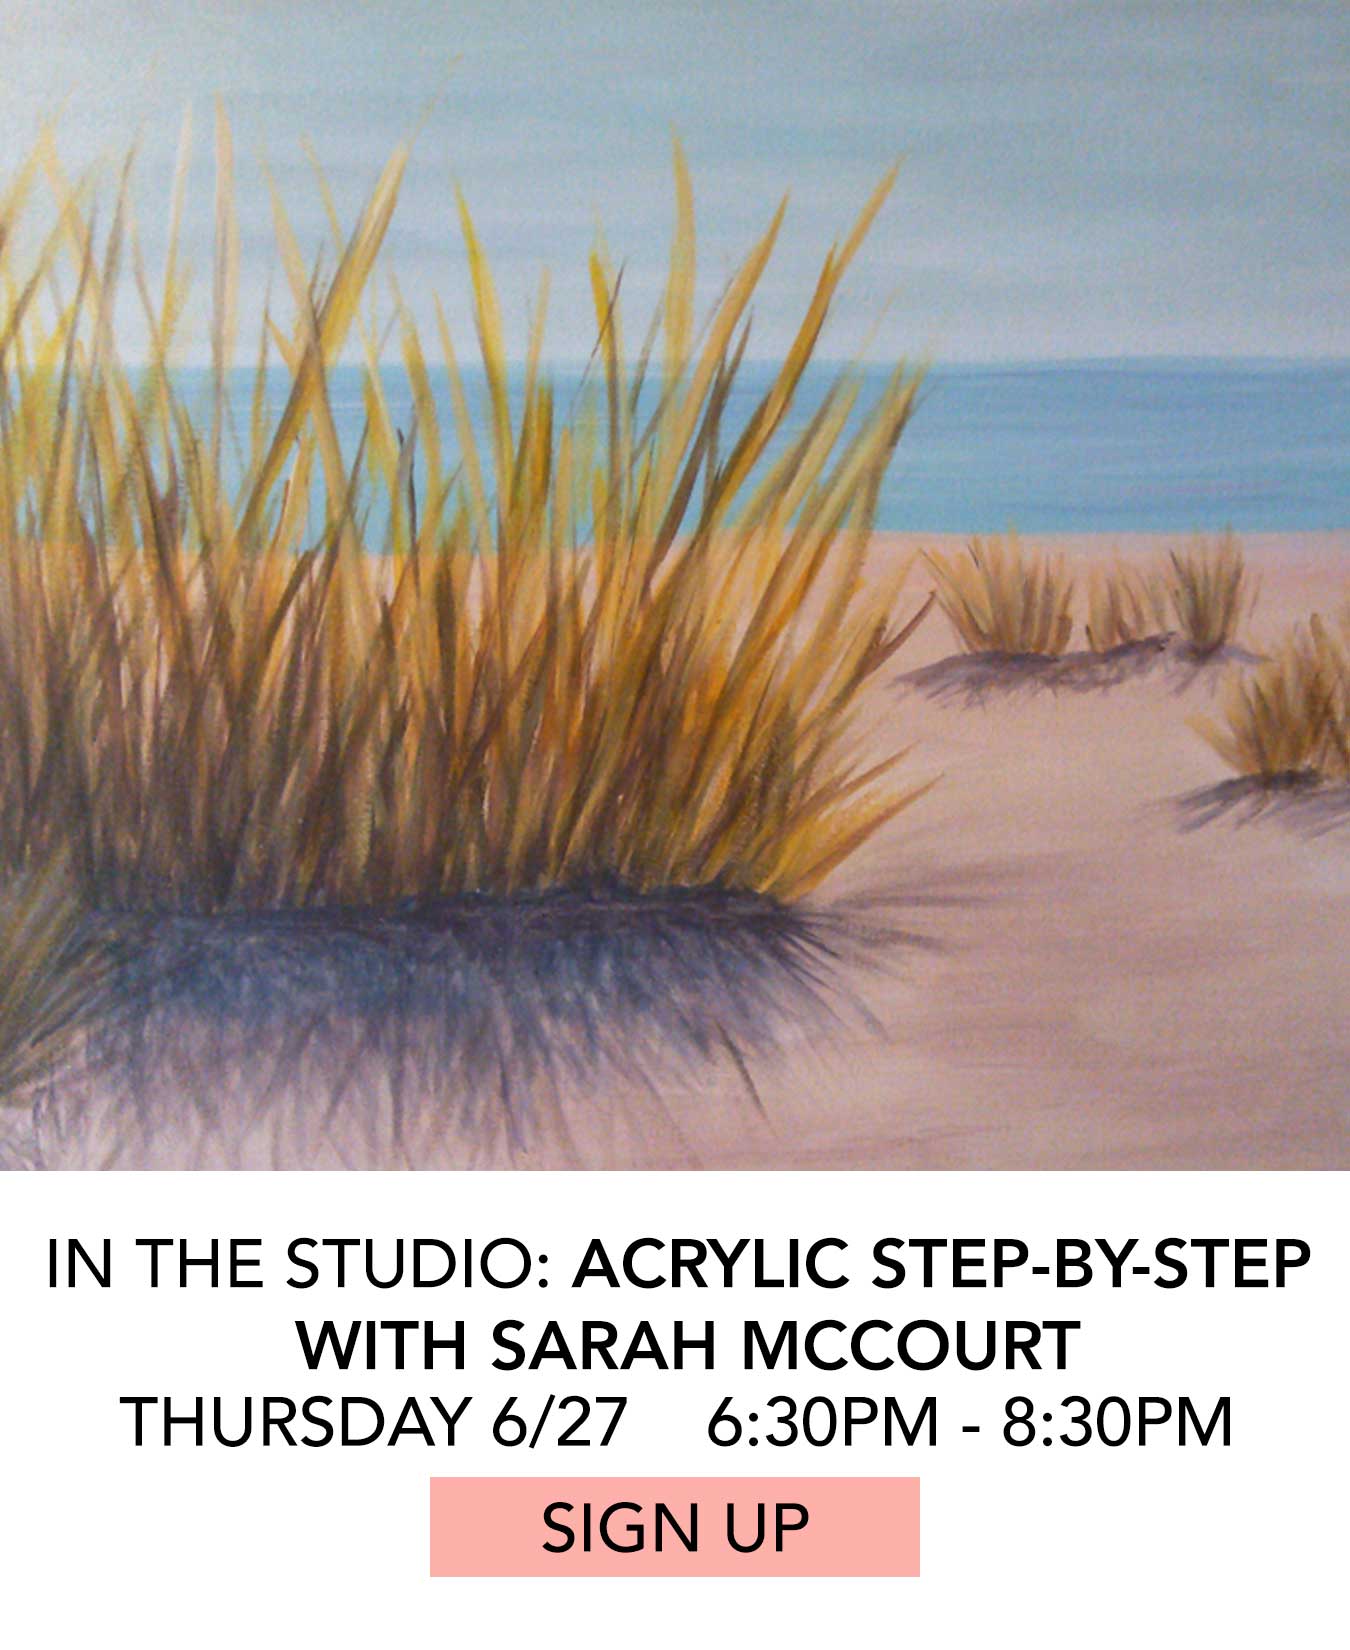 In the Studio: Acrylic Step-by-Step with Sarah McCourt. Thursday 6/27 from 6:30pm to 8:30pm. Click to Sign Up.